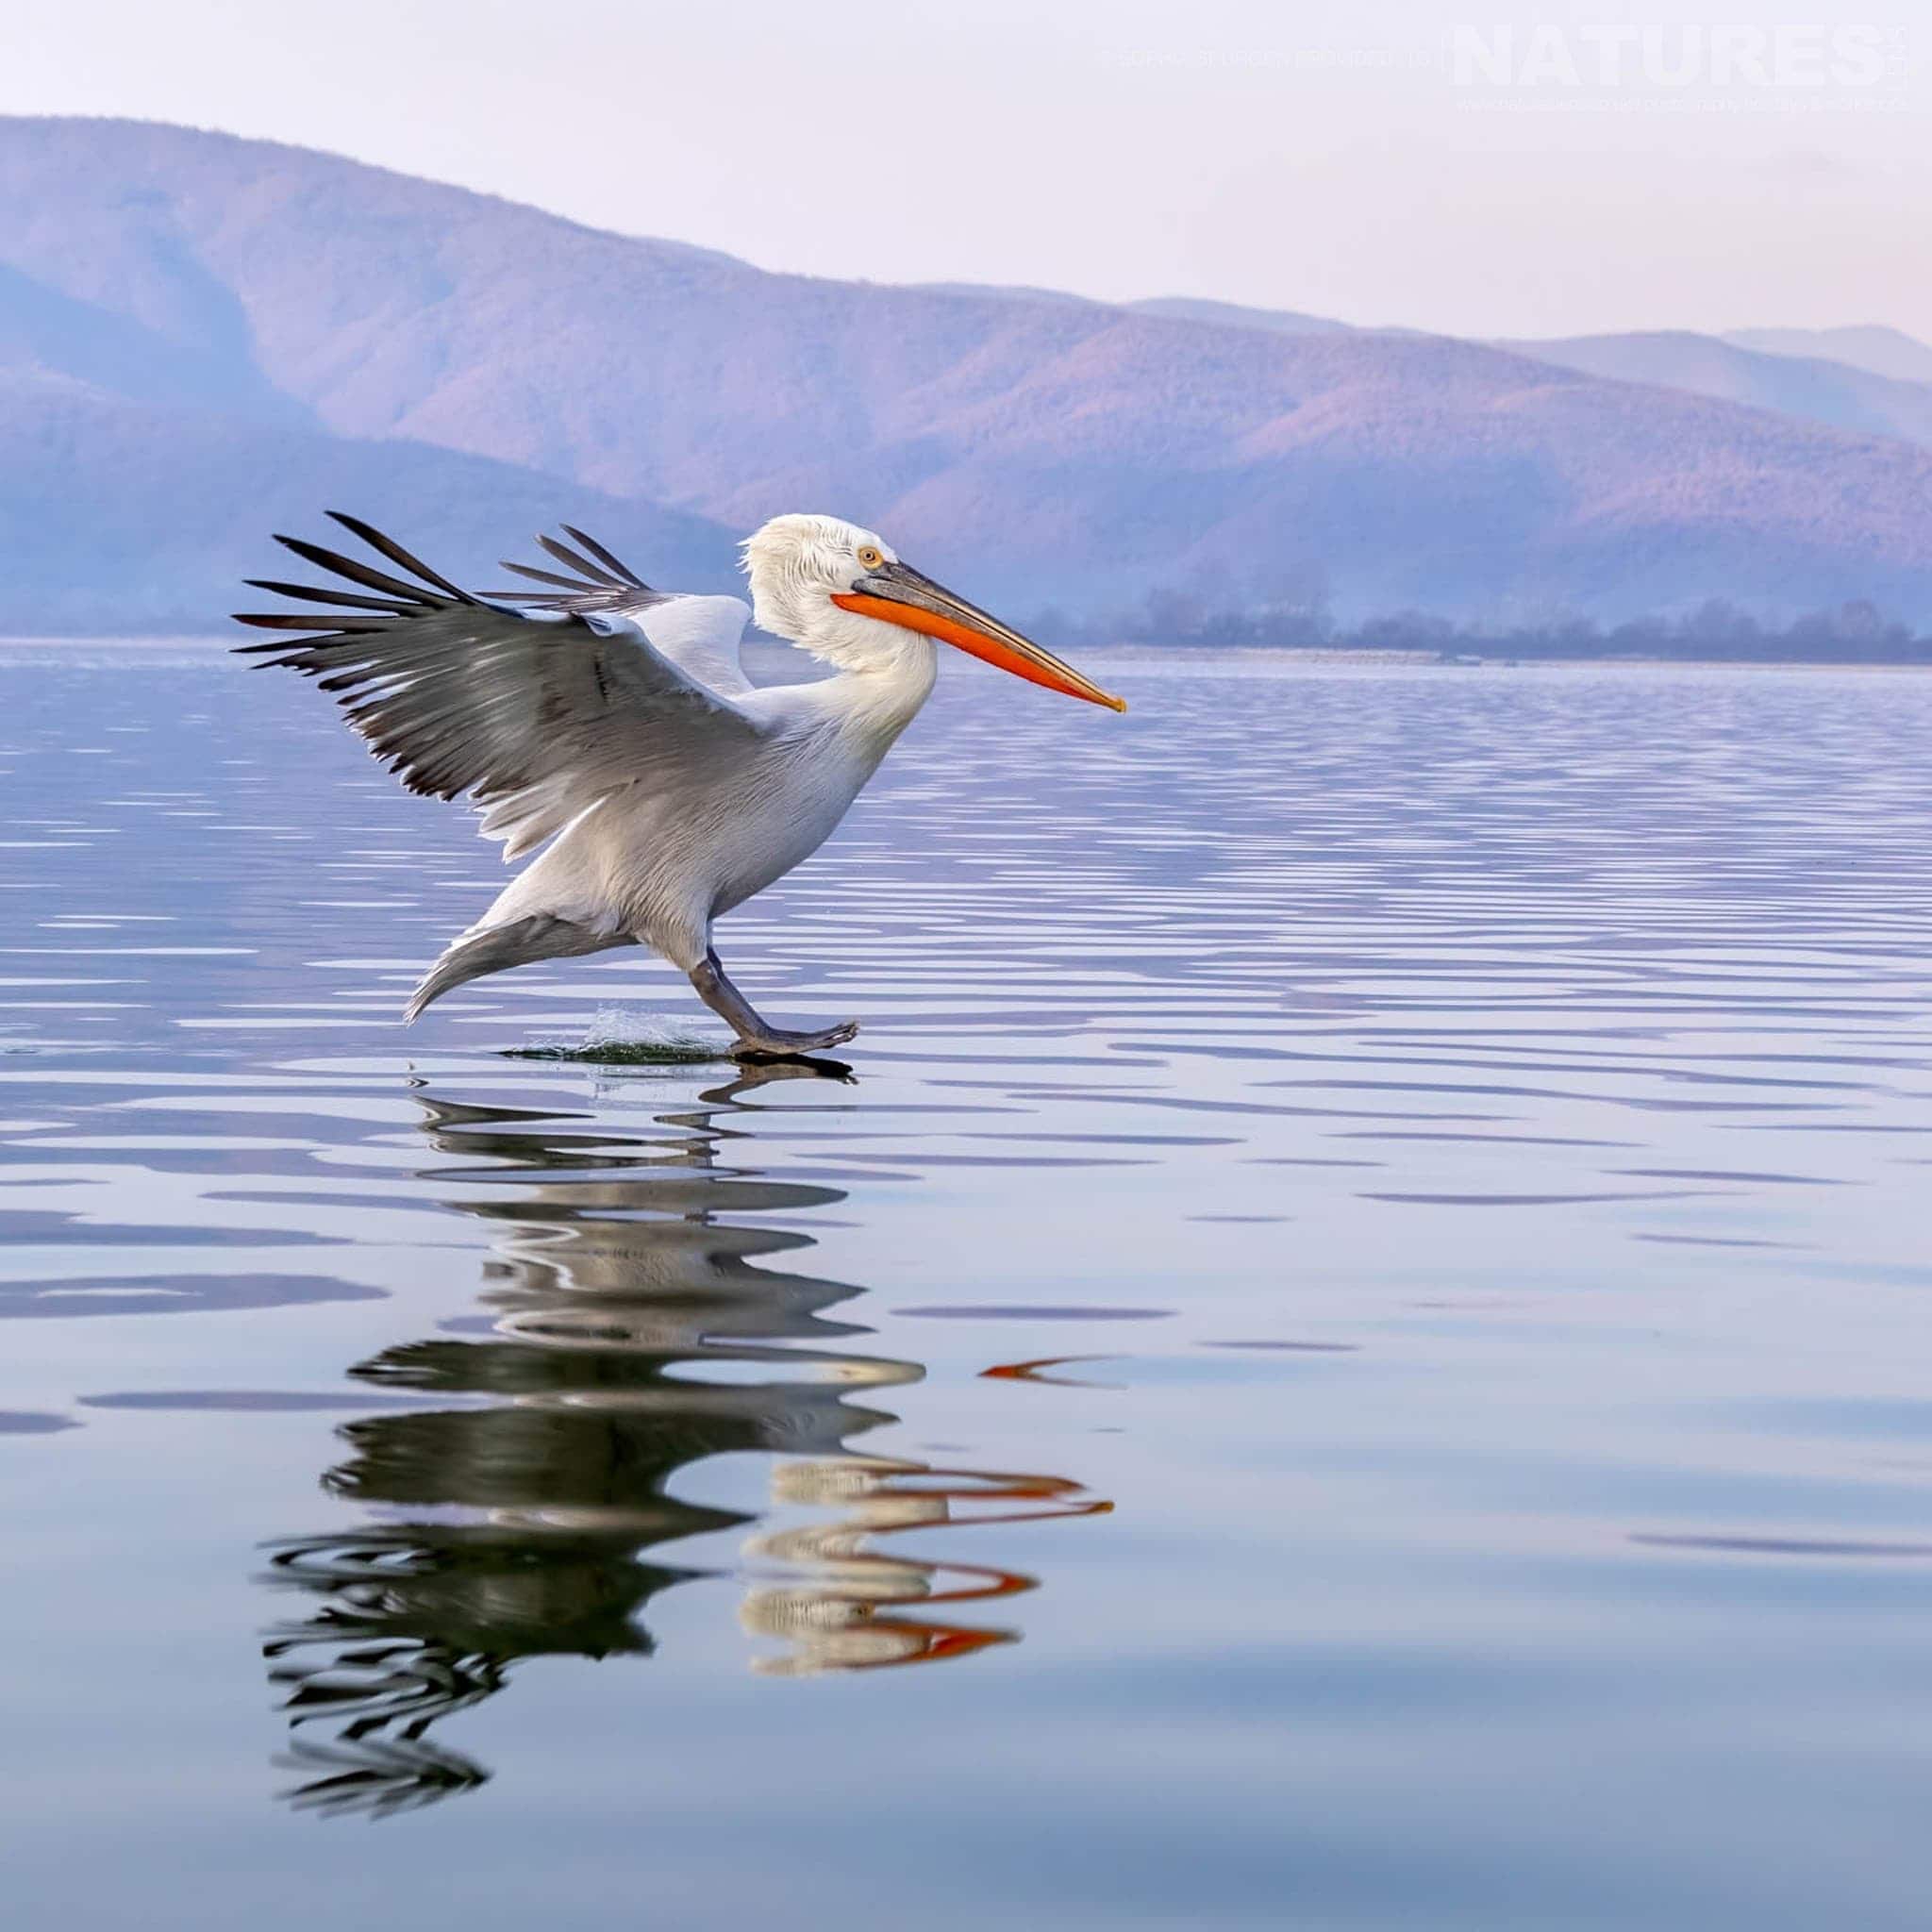 One Of The Dalmatian Pelicans Of Greece Lands On The Waters Of Lake Kerkini